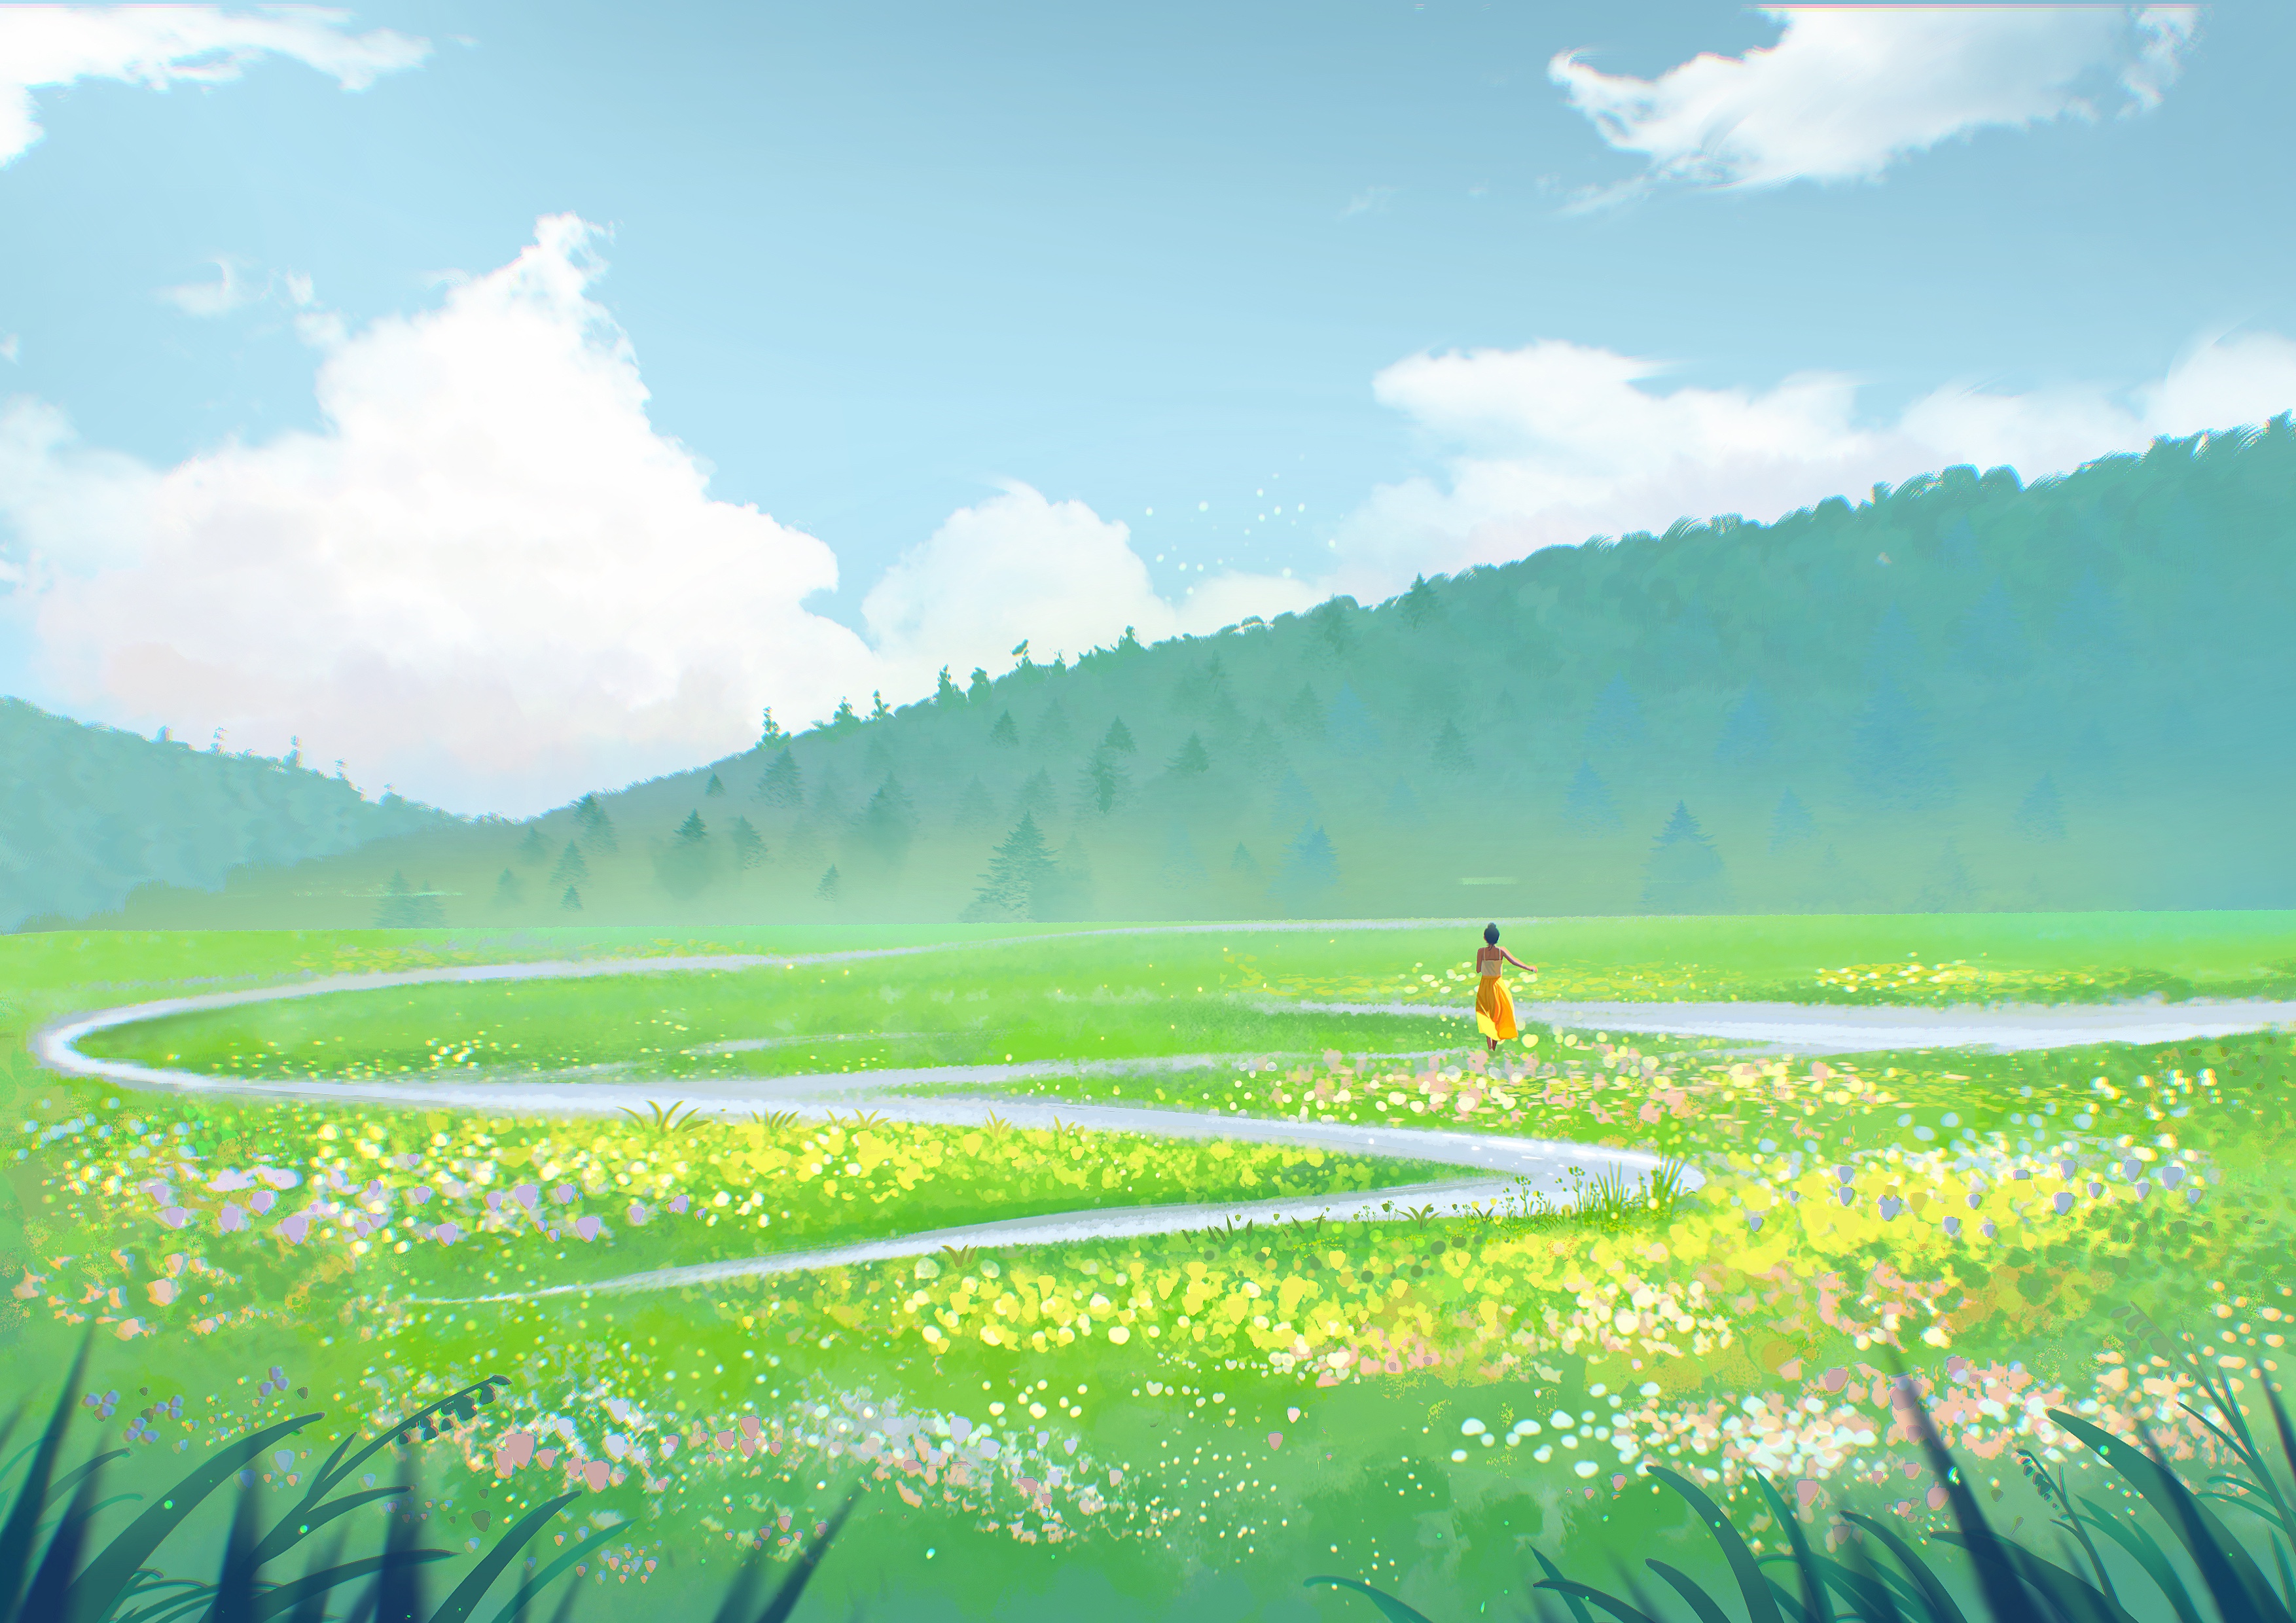 General 3508x2480 digital art artwork illustration landscape field mountains forest nature river clouds plants women yellow skirt skirt drawing sky leaves bright